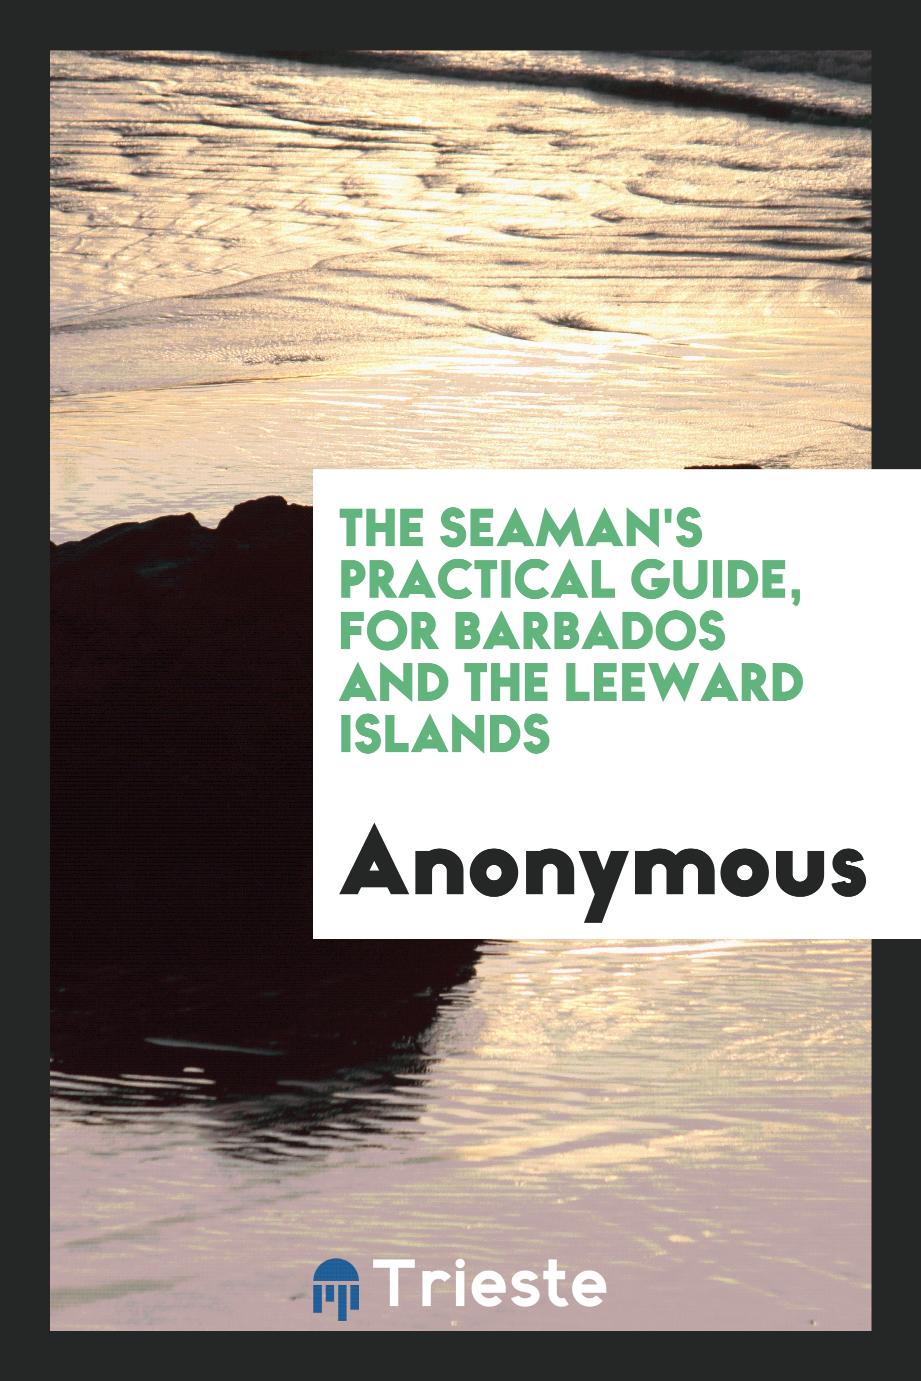 The Seaman's Practical Guide, for Barbados and the Leeward Islands